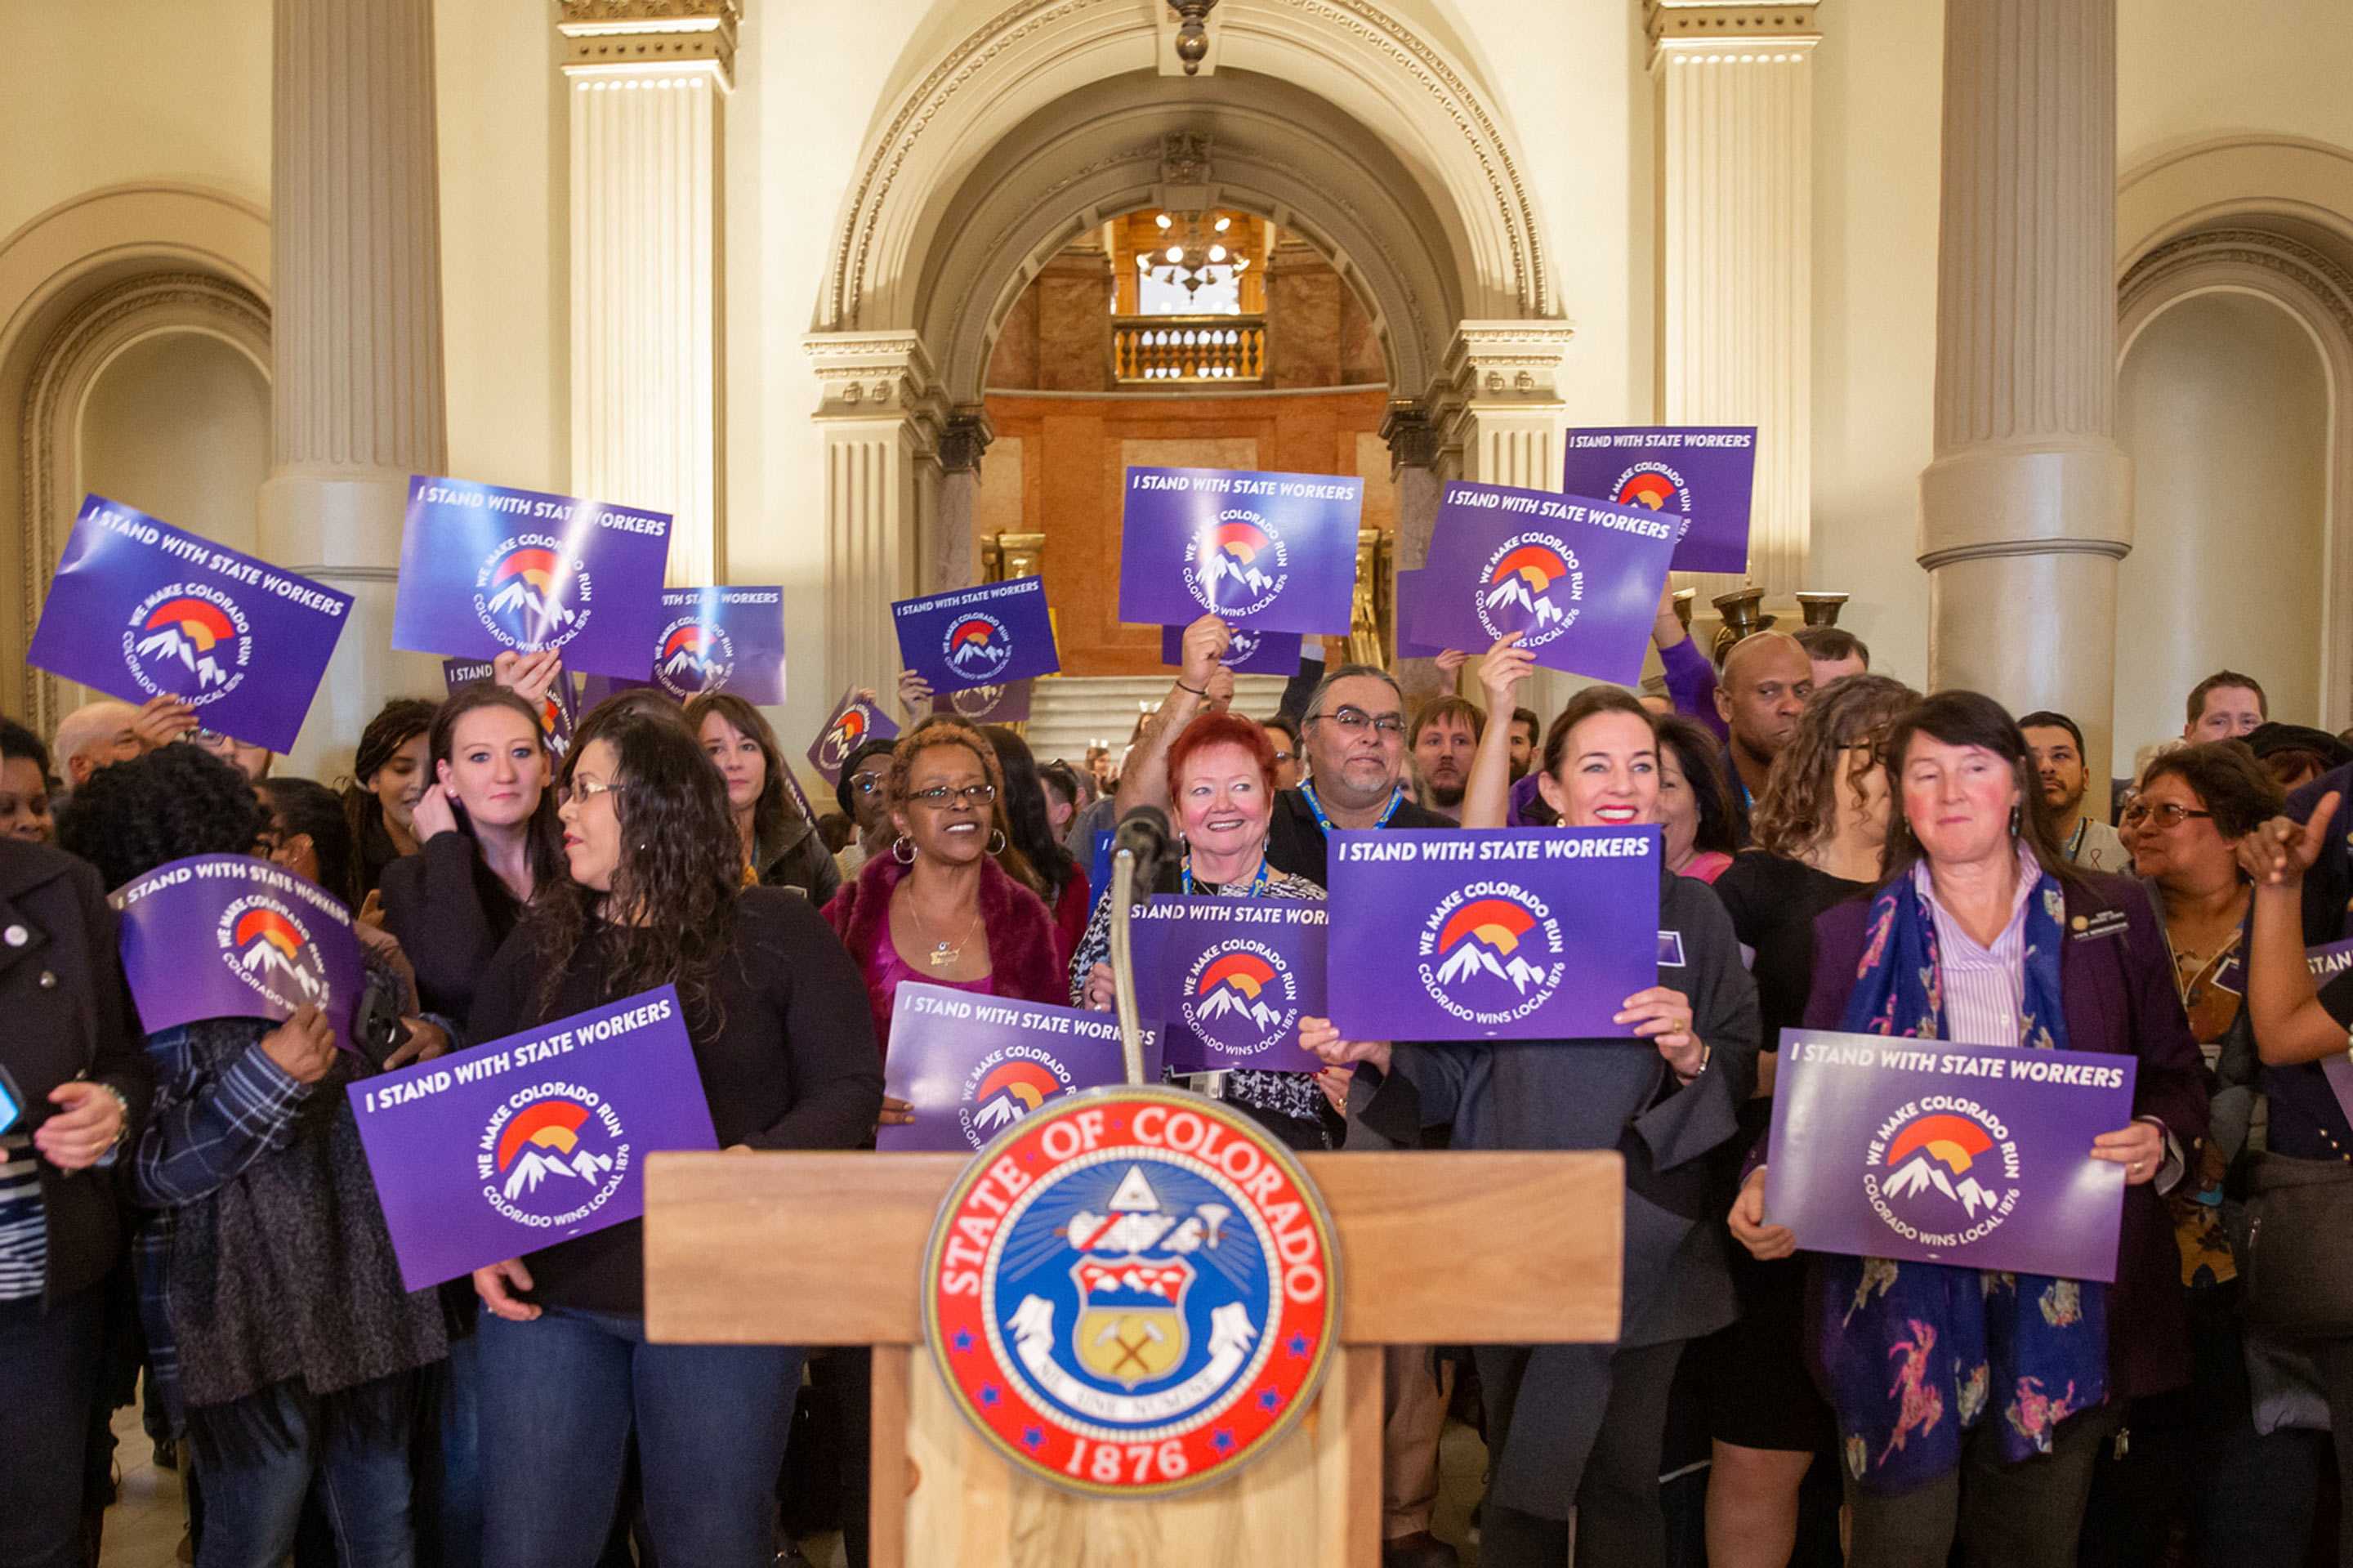 When state employees have a voice, Colorado WINS